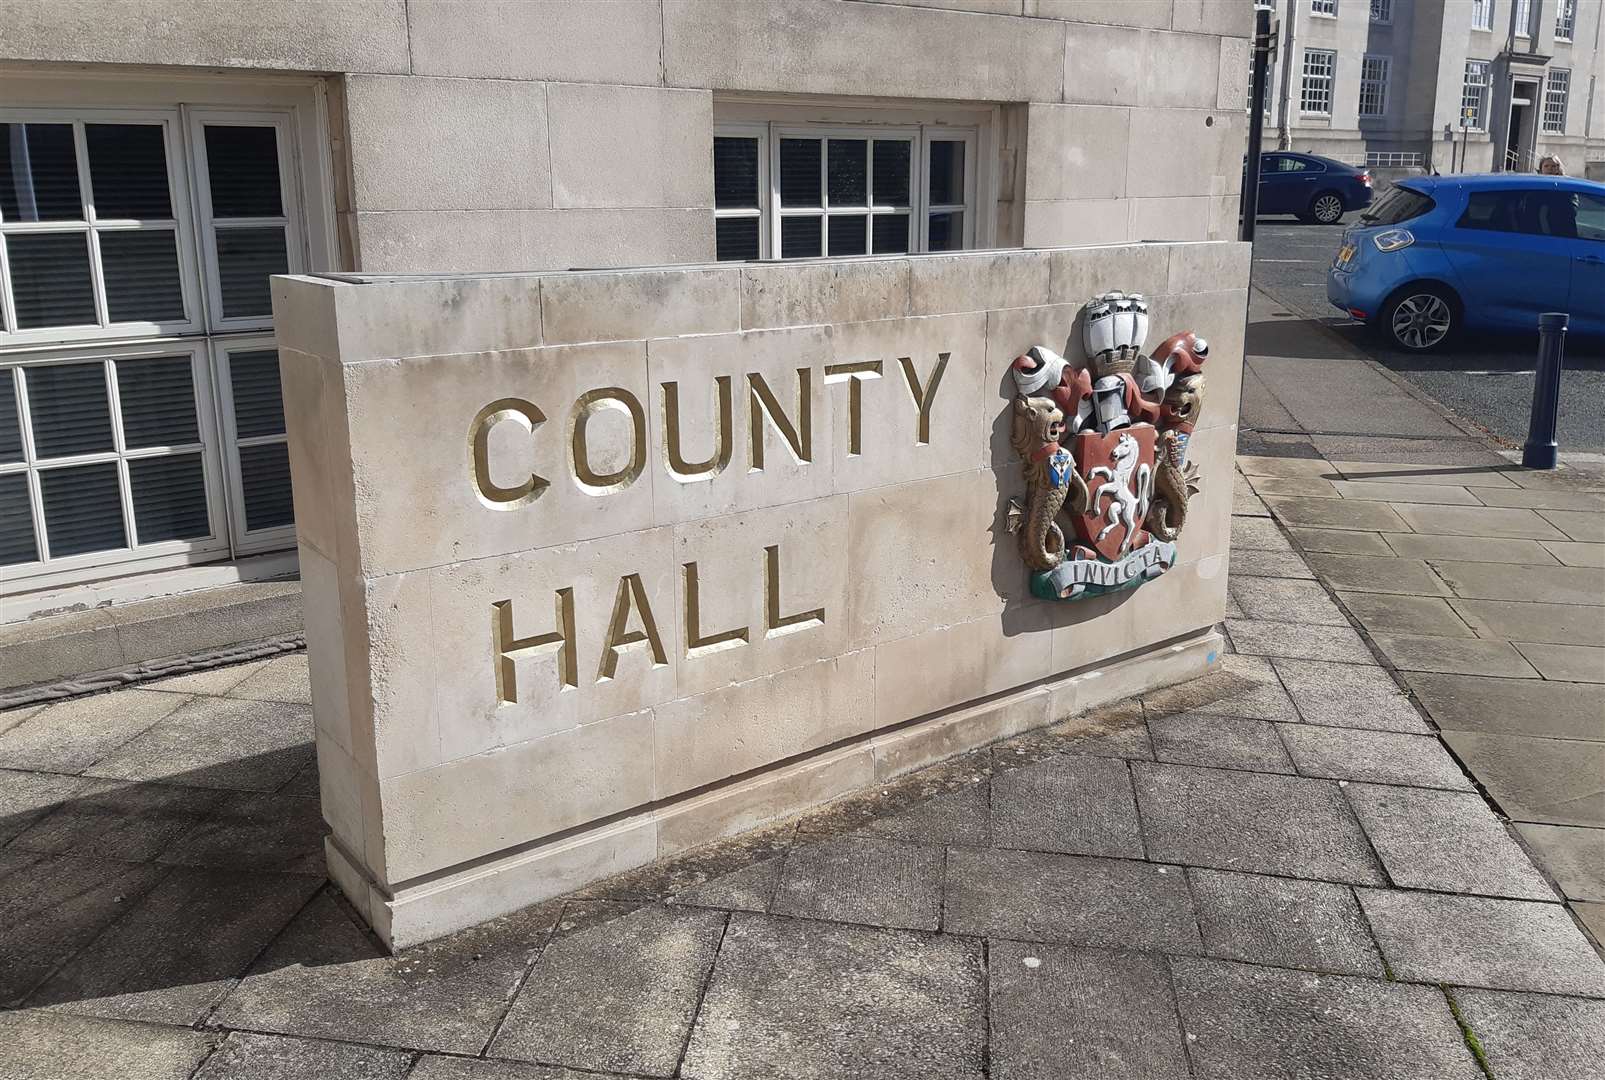 Kent County Council headquarters in Maidstone - home of our local Prevent team